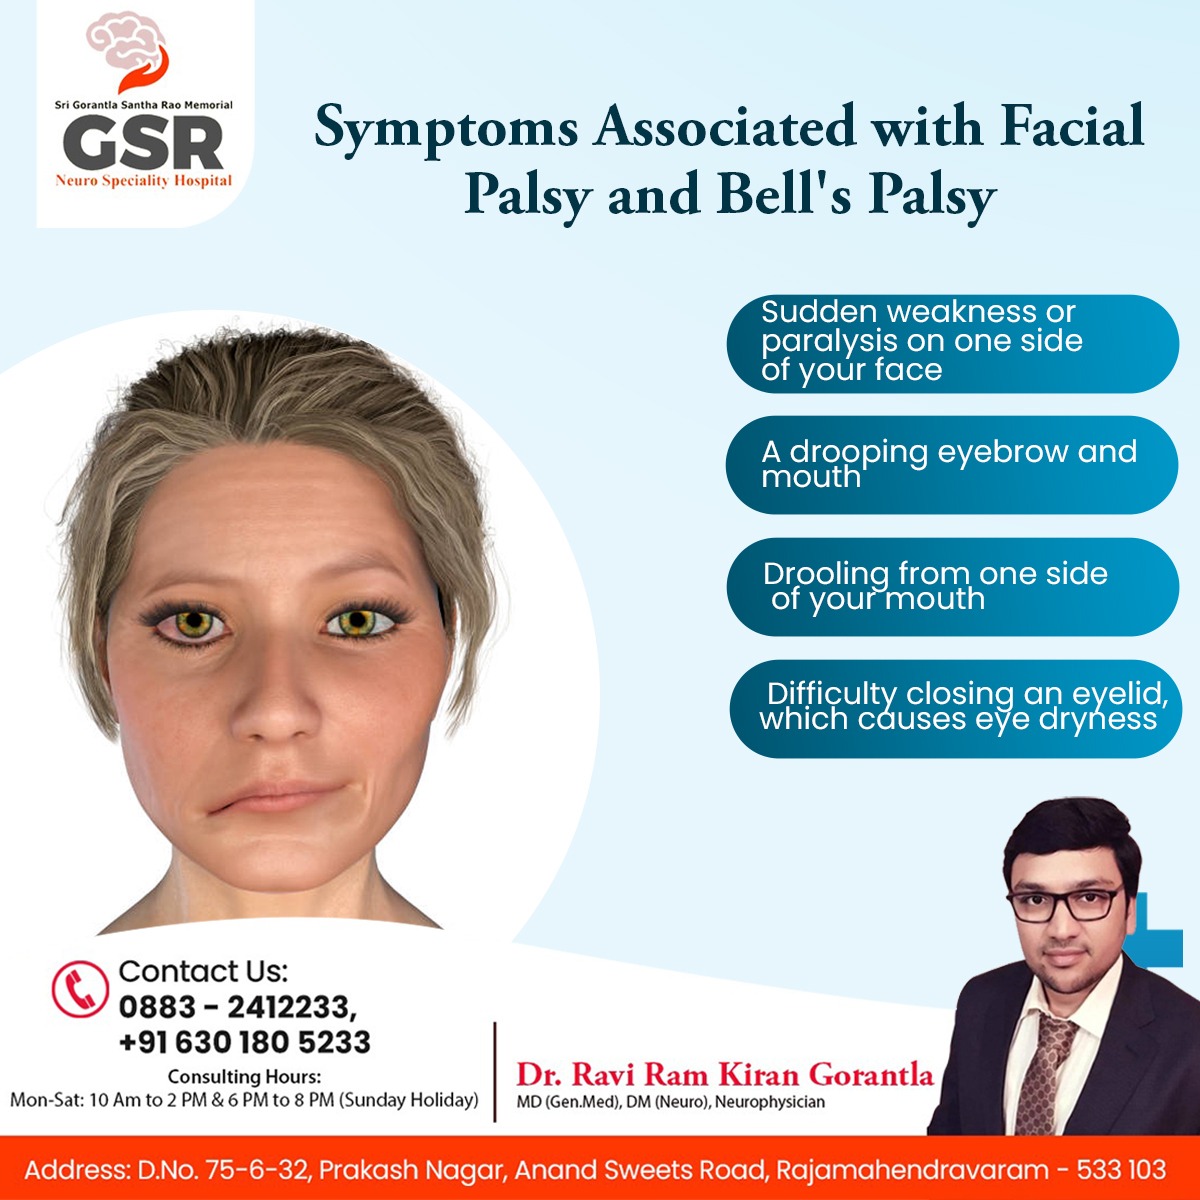 Identify and address symptoms related to Facial Palsy and Bell's Palsy with precision at GSR Neuro Speciality Hospital. Our expert neurologists provide specialized care for comprehensive diagnosis and treatment.

#GSRNeuroHospital #FacialPalsy #BellsPalsy #NeuroSpecialists